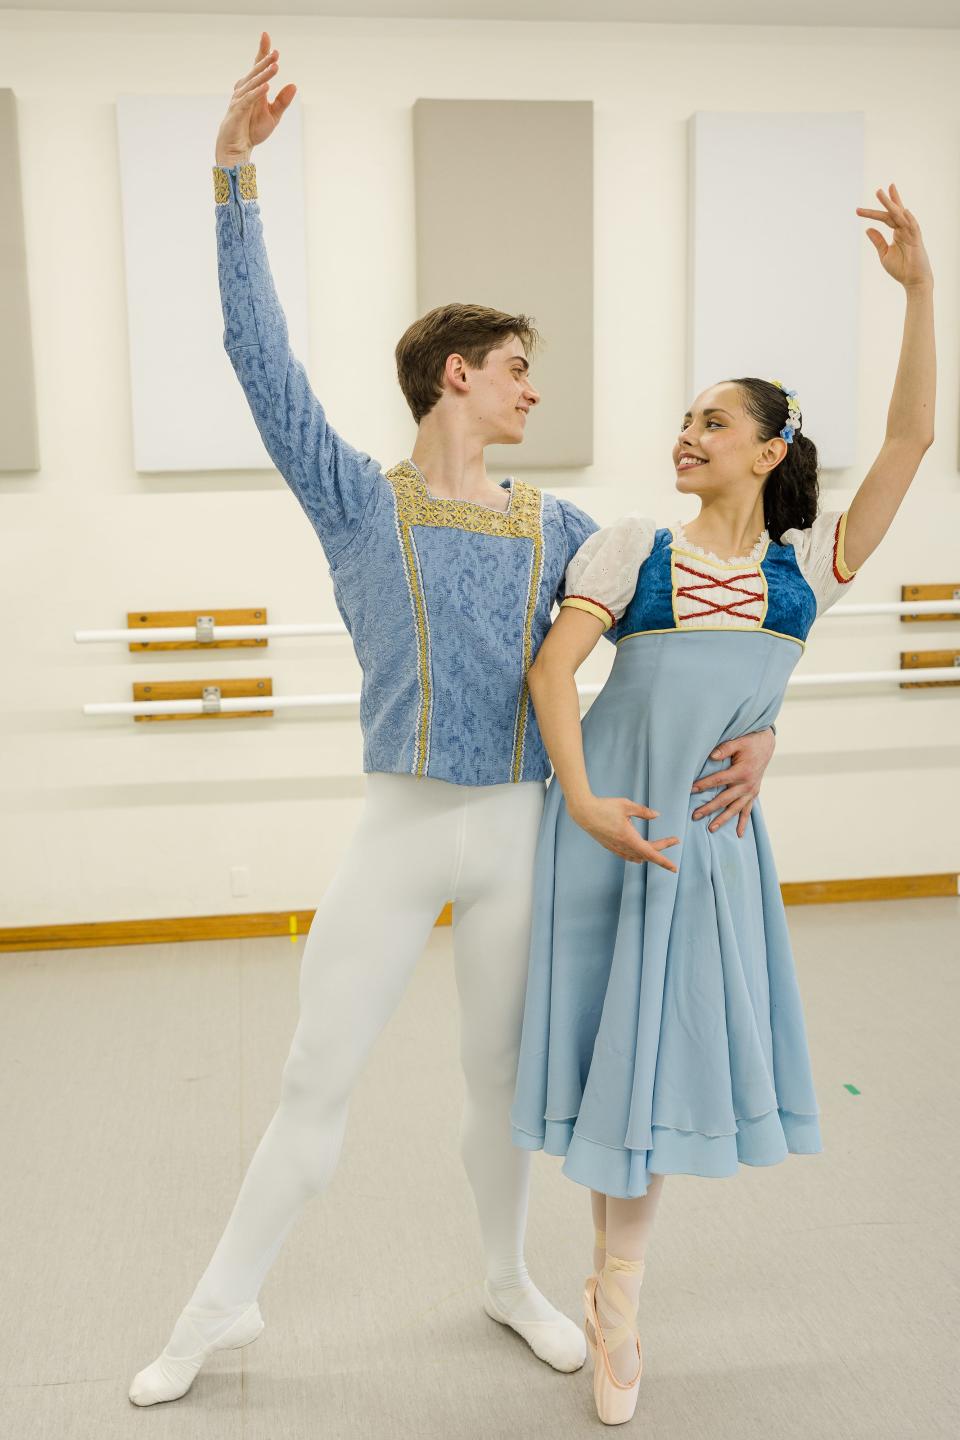 Guest dancer Levian Mondville of the Cleveland Ballet plays the prince and Tallmadge High senior Rebecca Banig plays the title character in Ballet Excel Ohio's "Snow White" at the Akron Civic Theatre March 9 and 10.